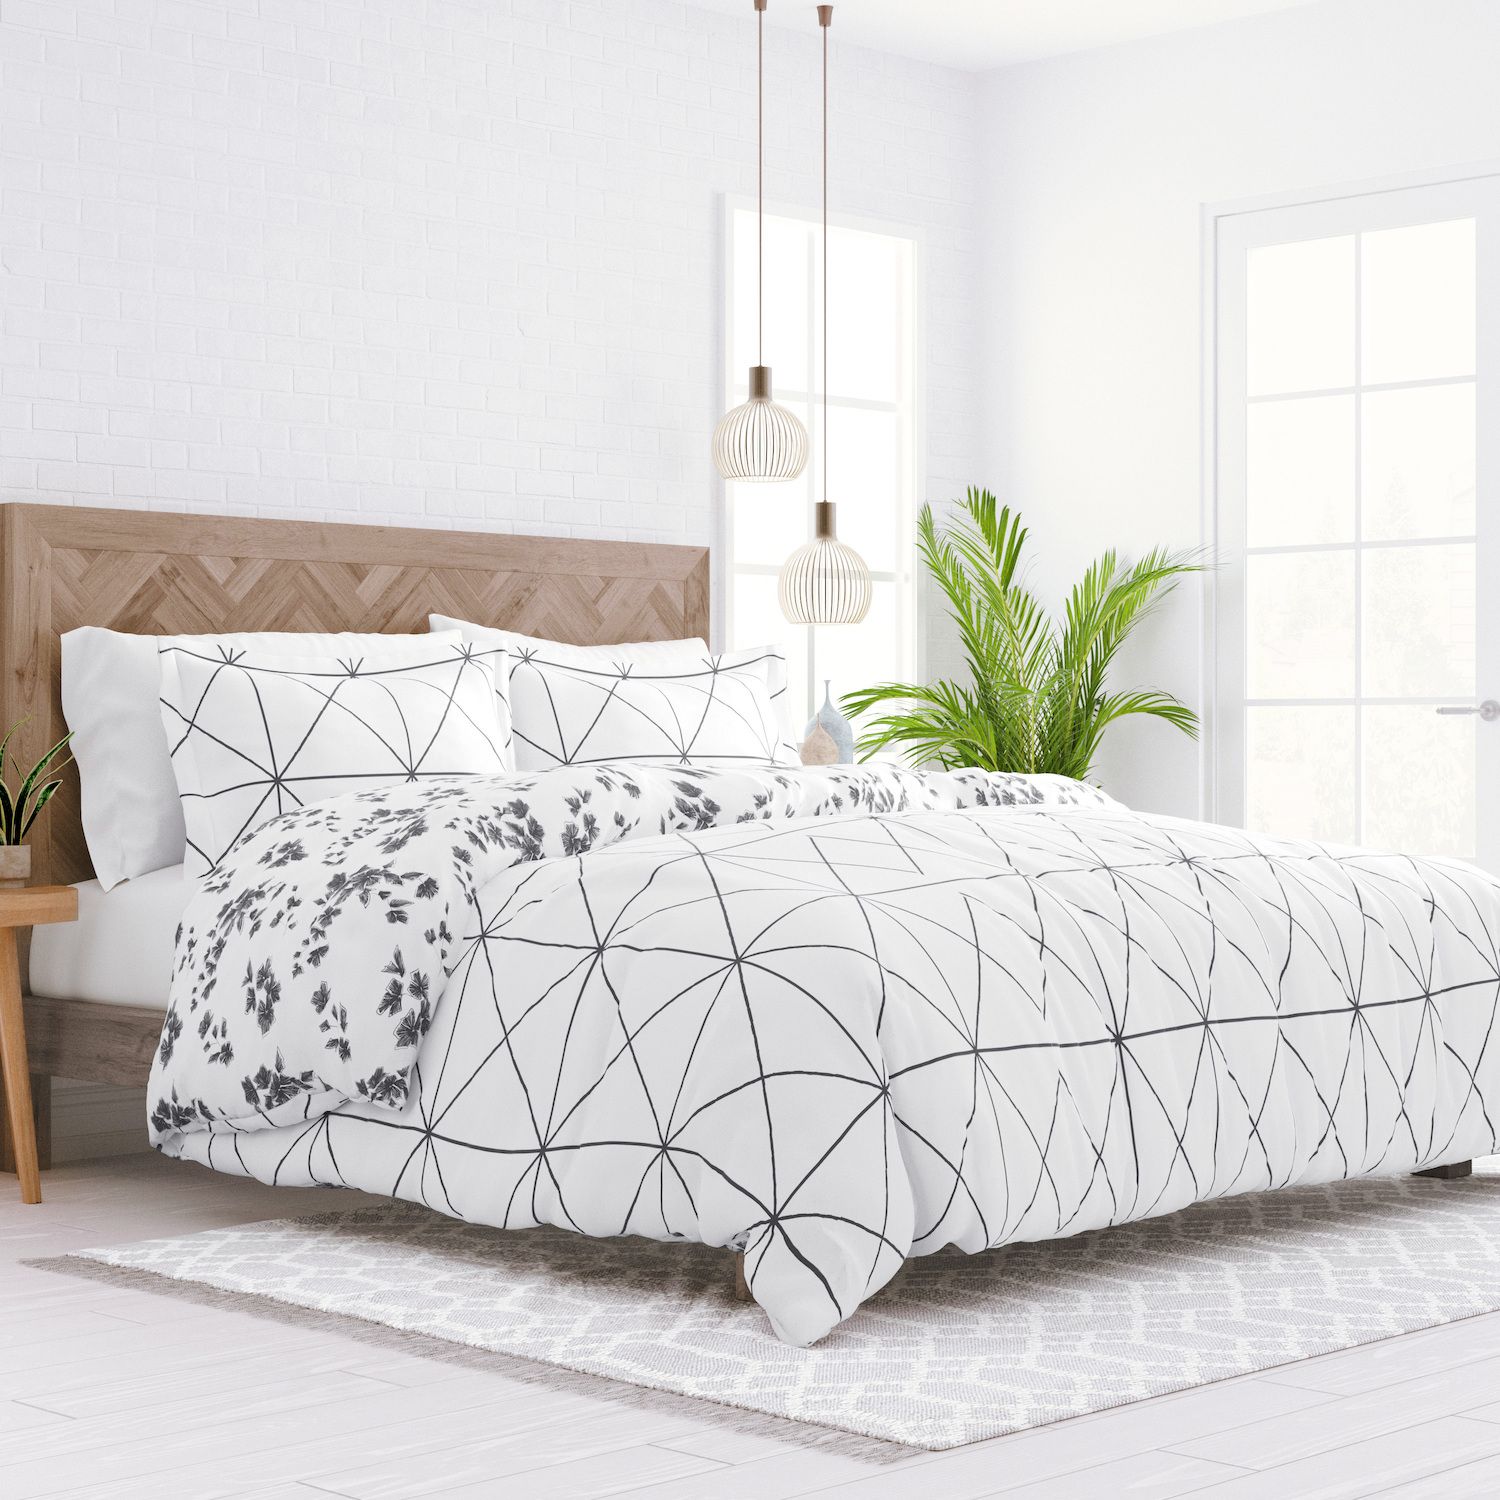 Image for Home Collection Premium Ultra Soft Edgy Flowers Pattern Reversible Duvet Cover Set at Kohl's.